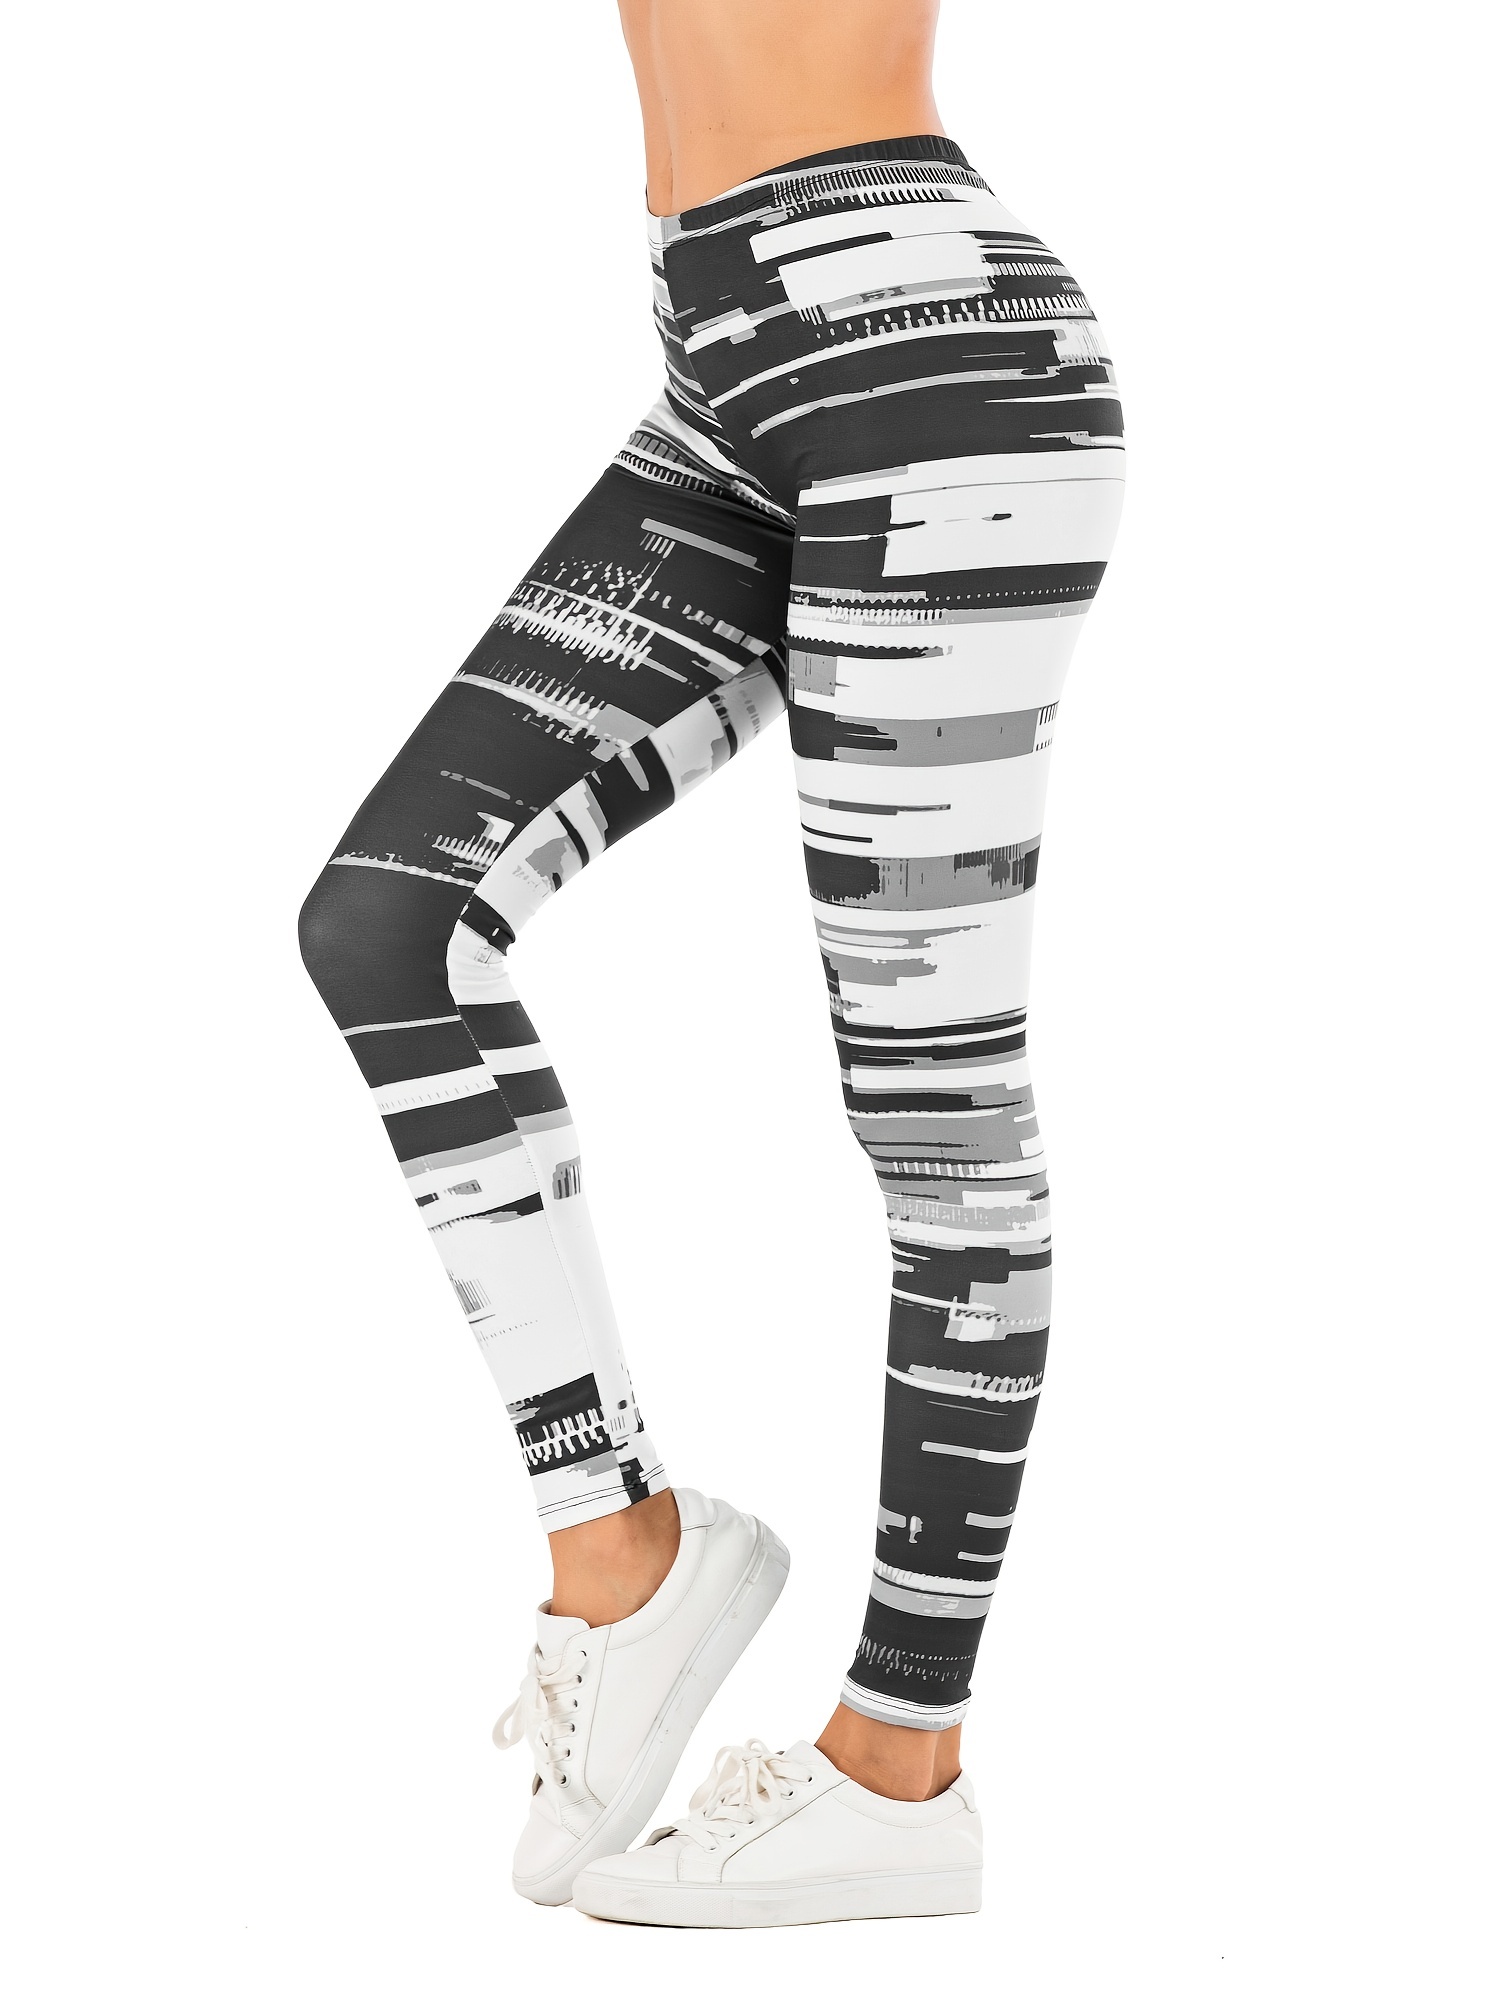 Womens Mid Rise Ankle Length Stretchy Leggings Black White Vertical Striped  Prin